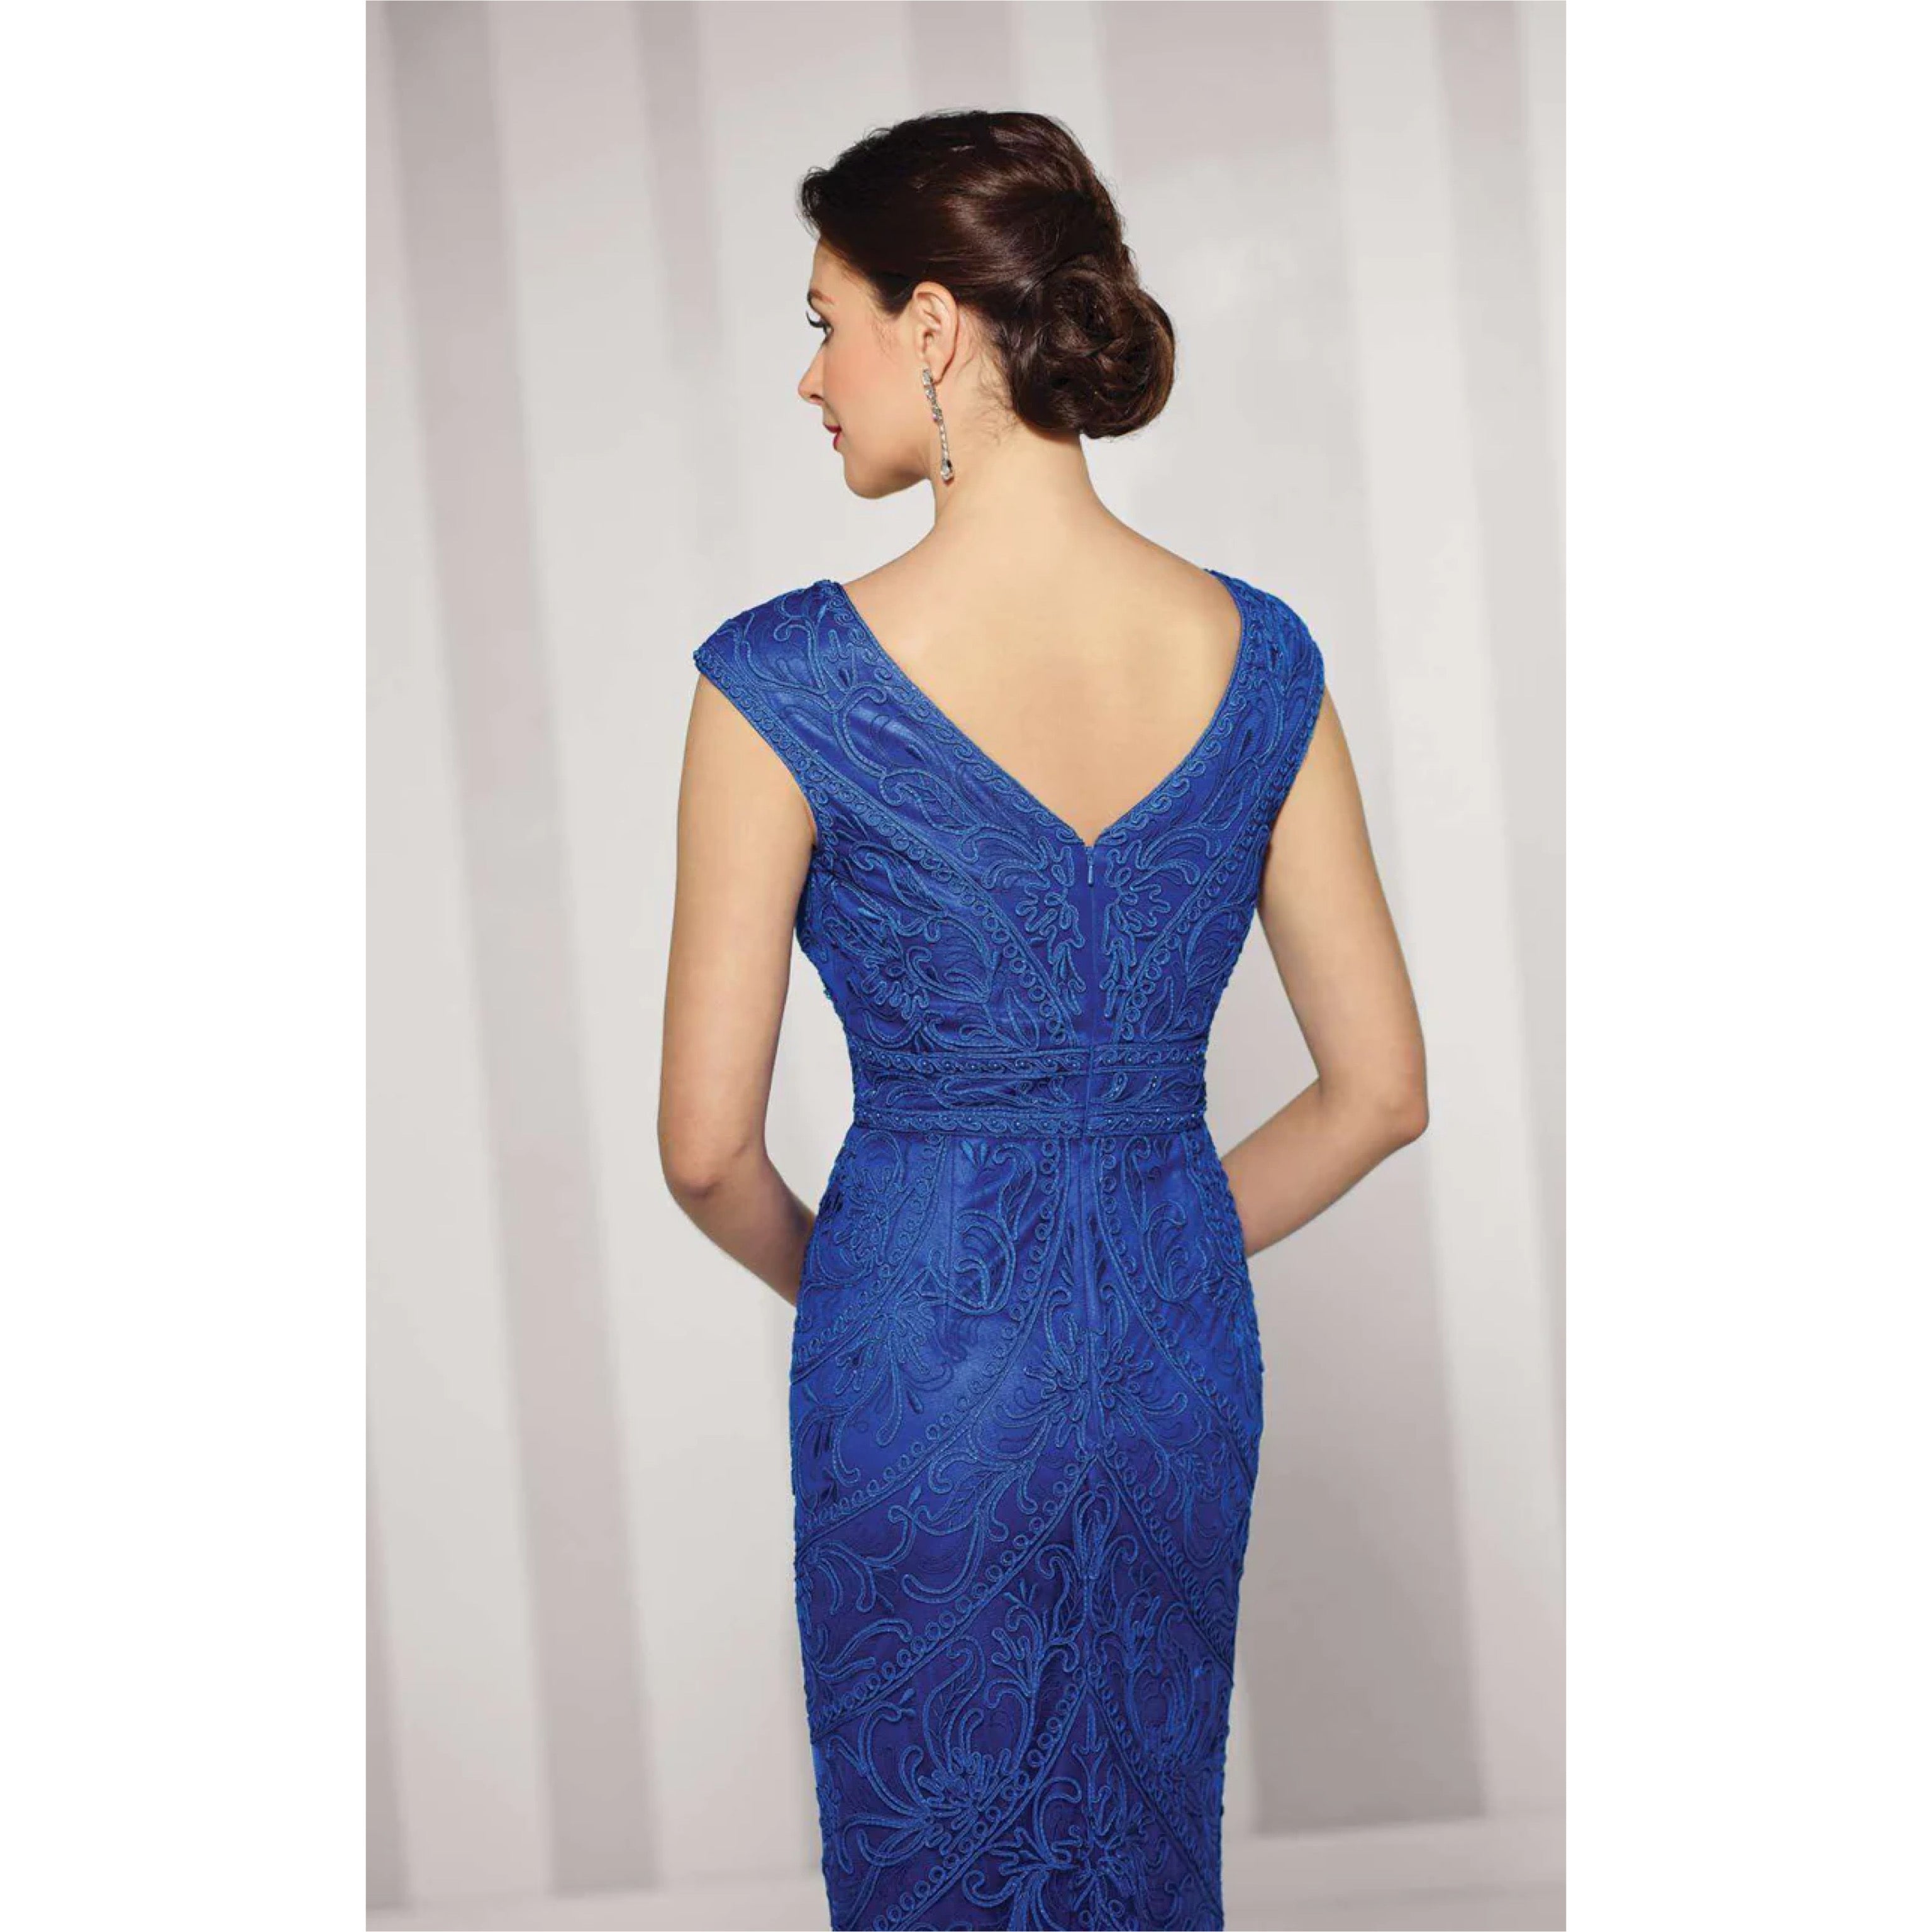 Cameron Blake royal blue dress, size 6, NEW WITH TAGS!